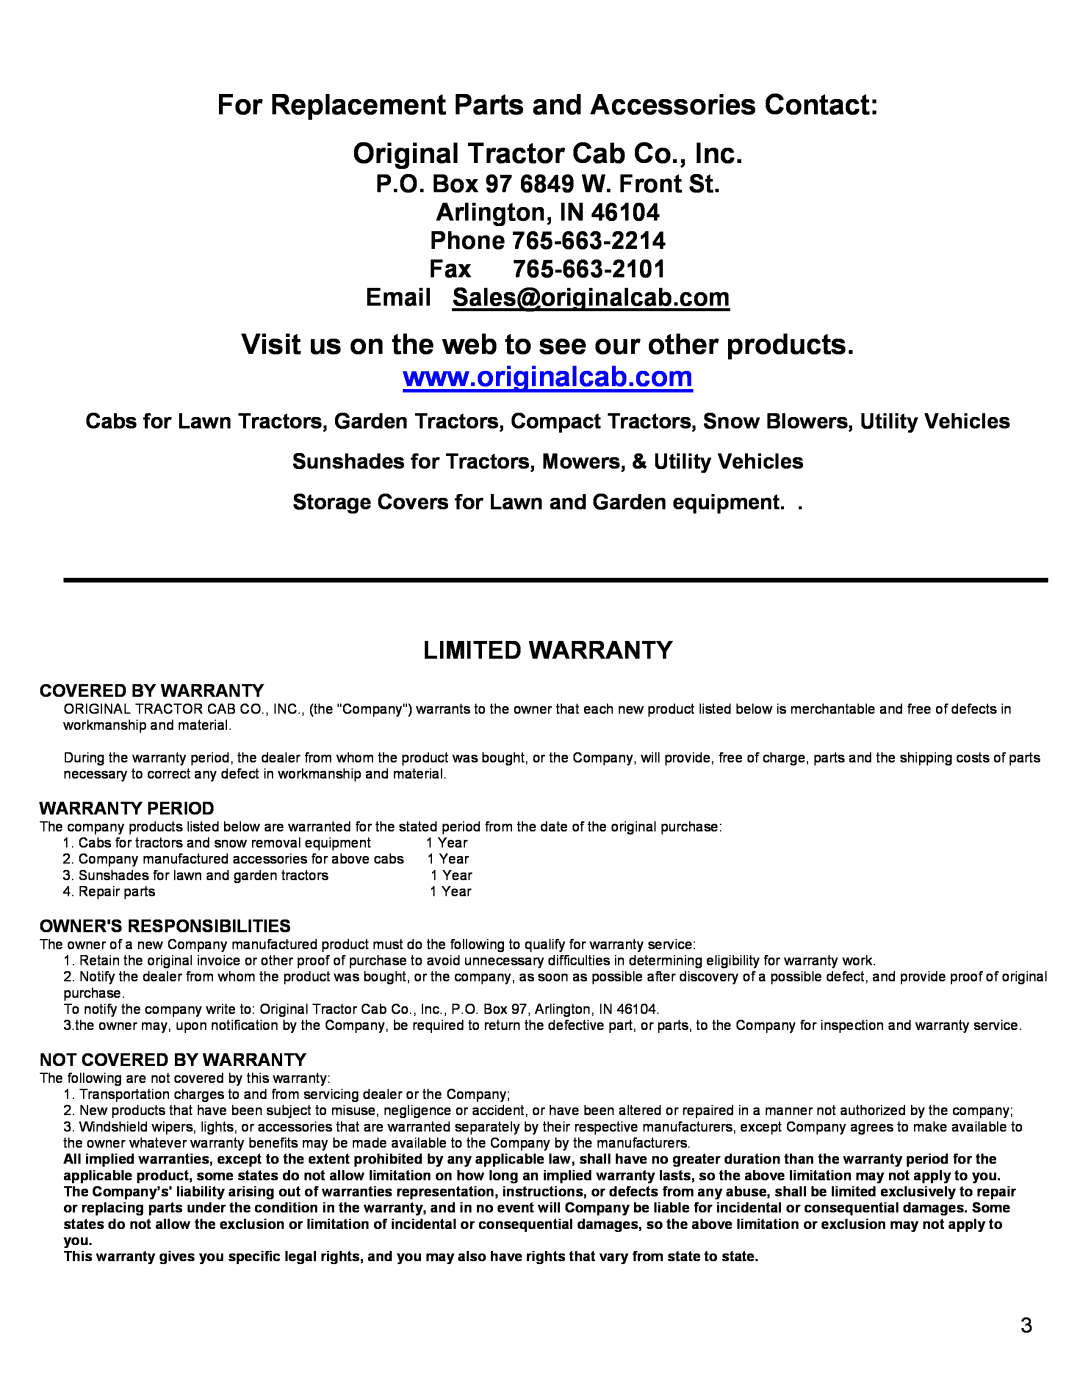 Snapper 1694921 manual For Replacement Parts and Accessories Contact, Original Tractor Cab Co., Inc, Limited Warranty 